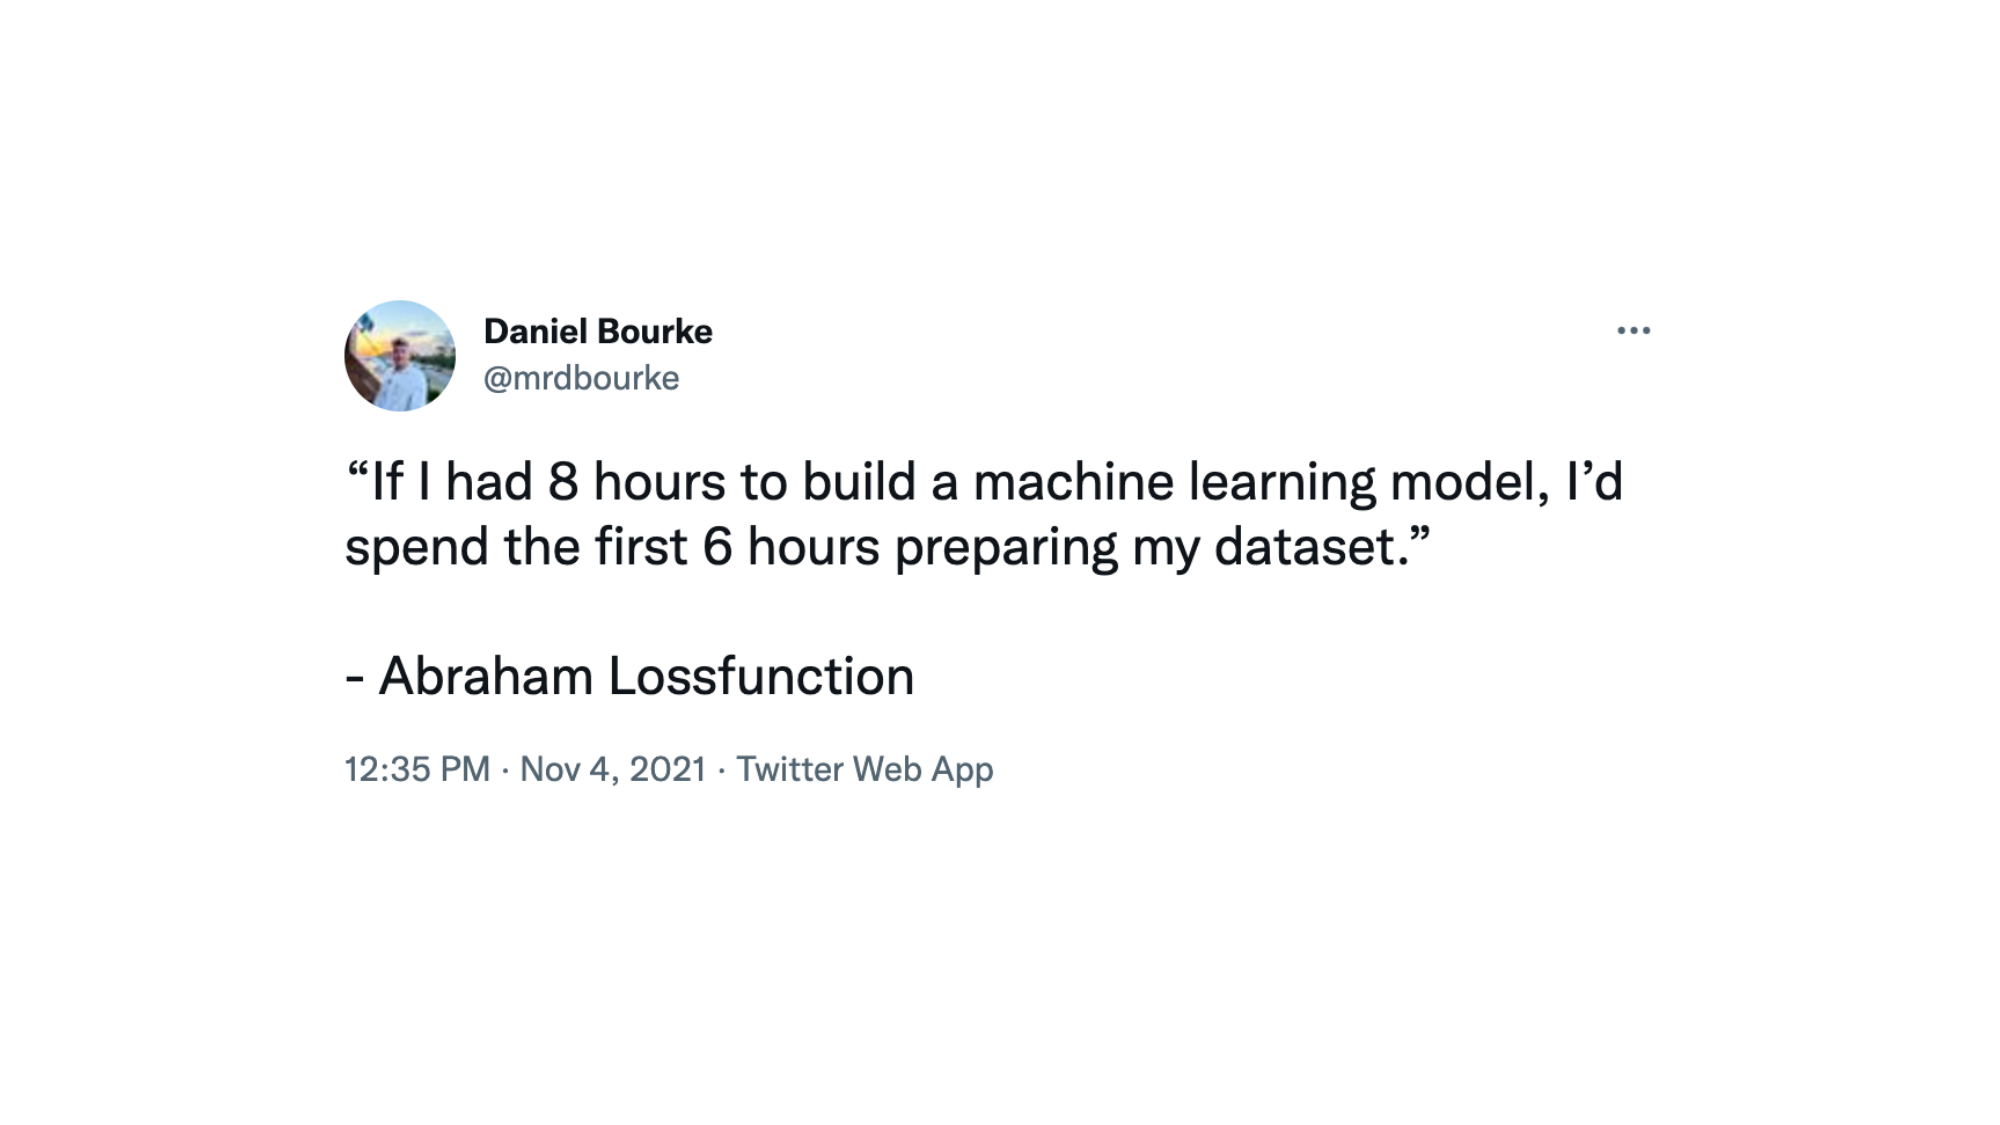 tweet by mrdbourke, if I had eight hours to build a machine learning model, I'd spend the first 6 hours preparing my dataset